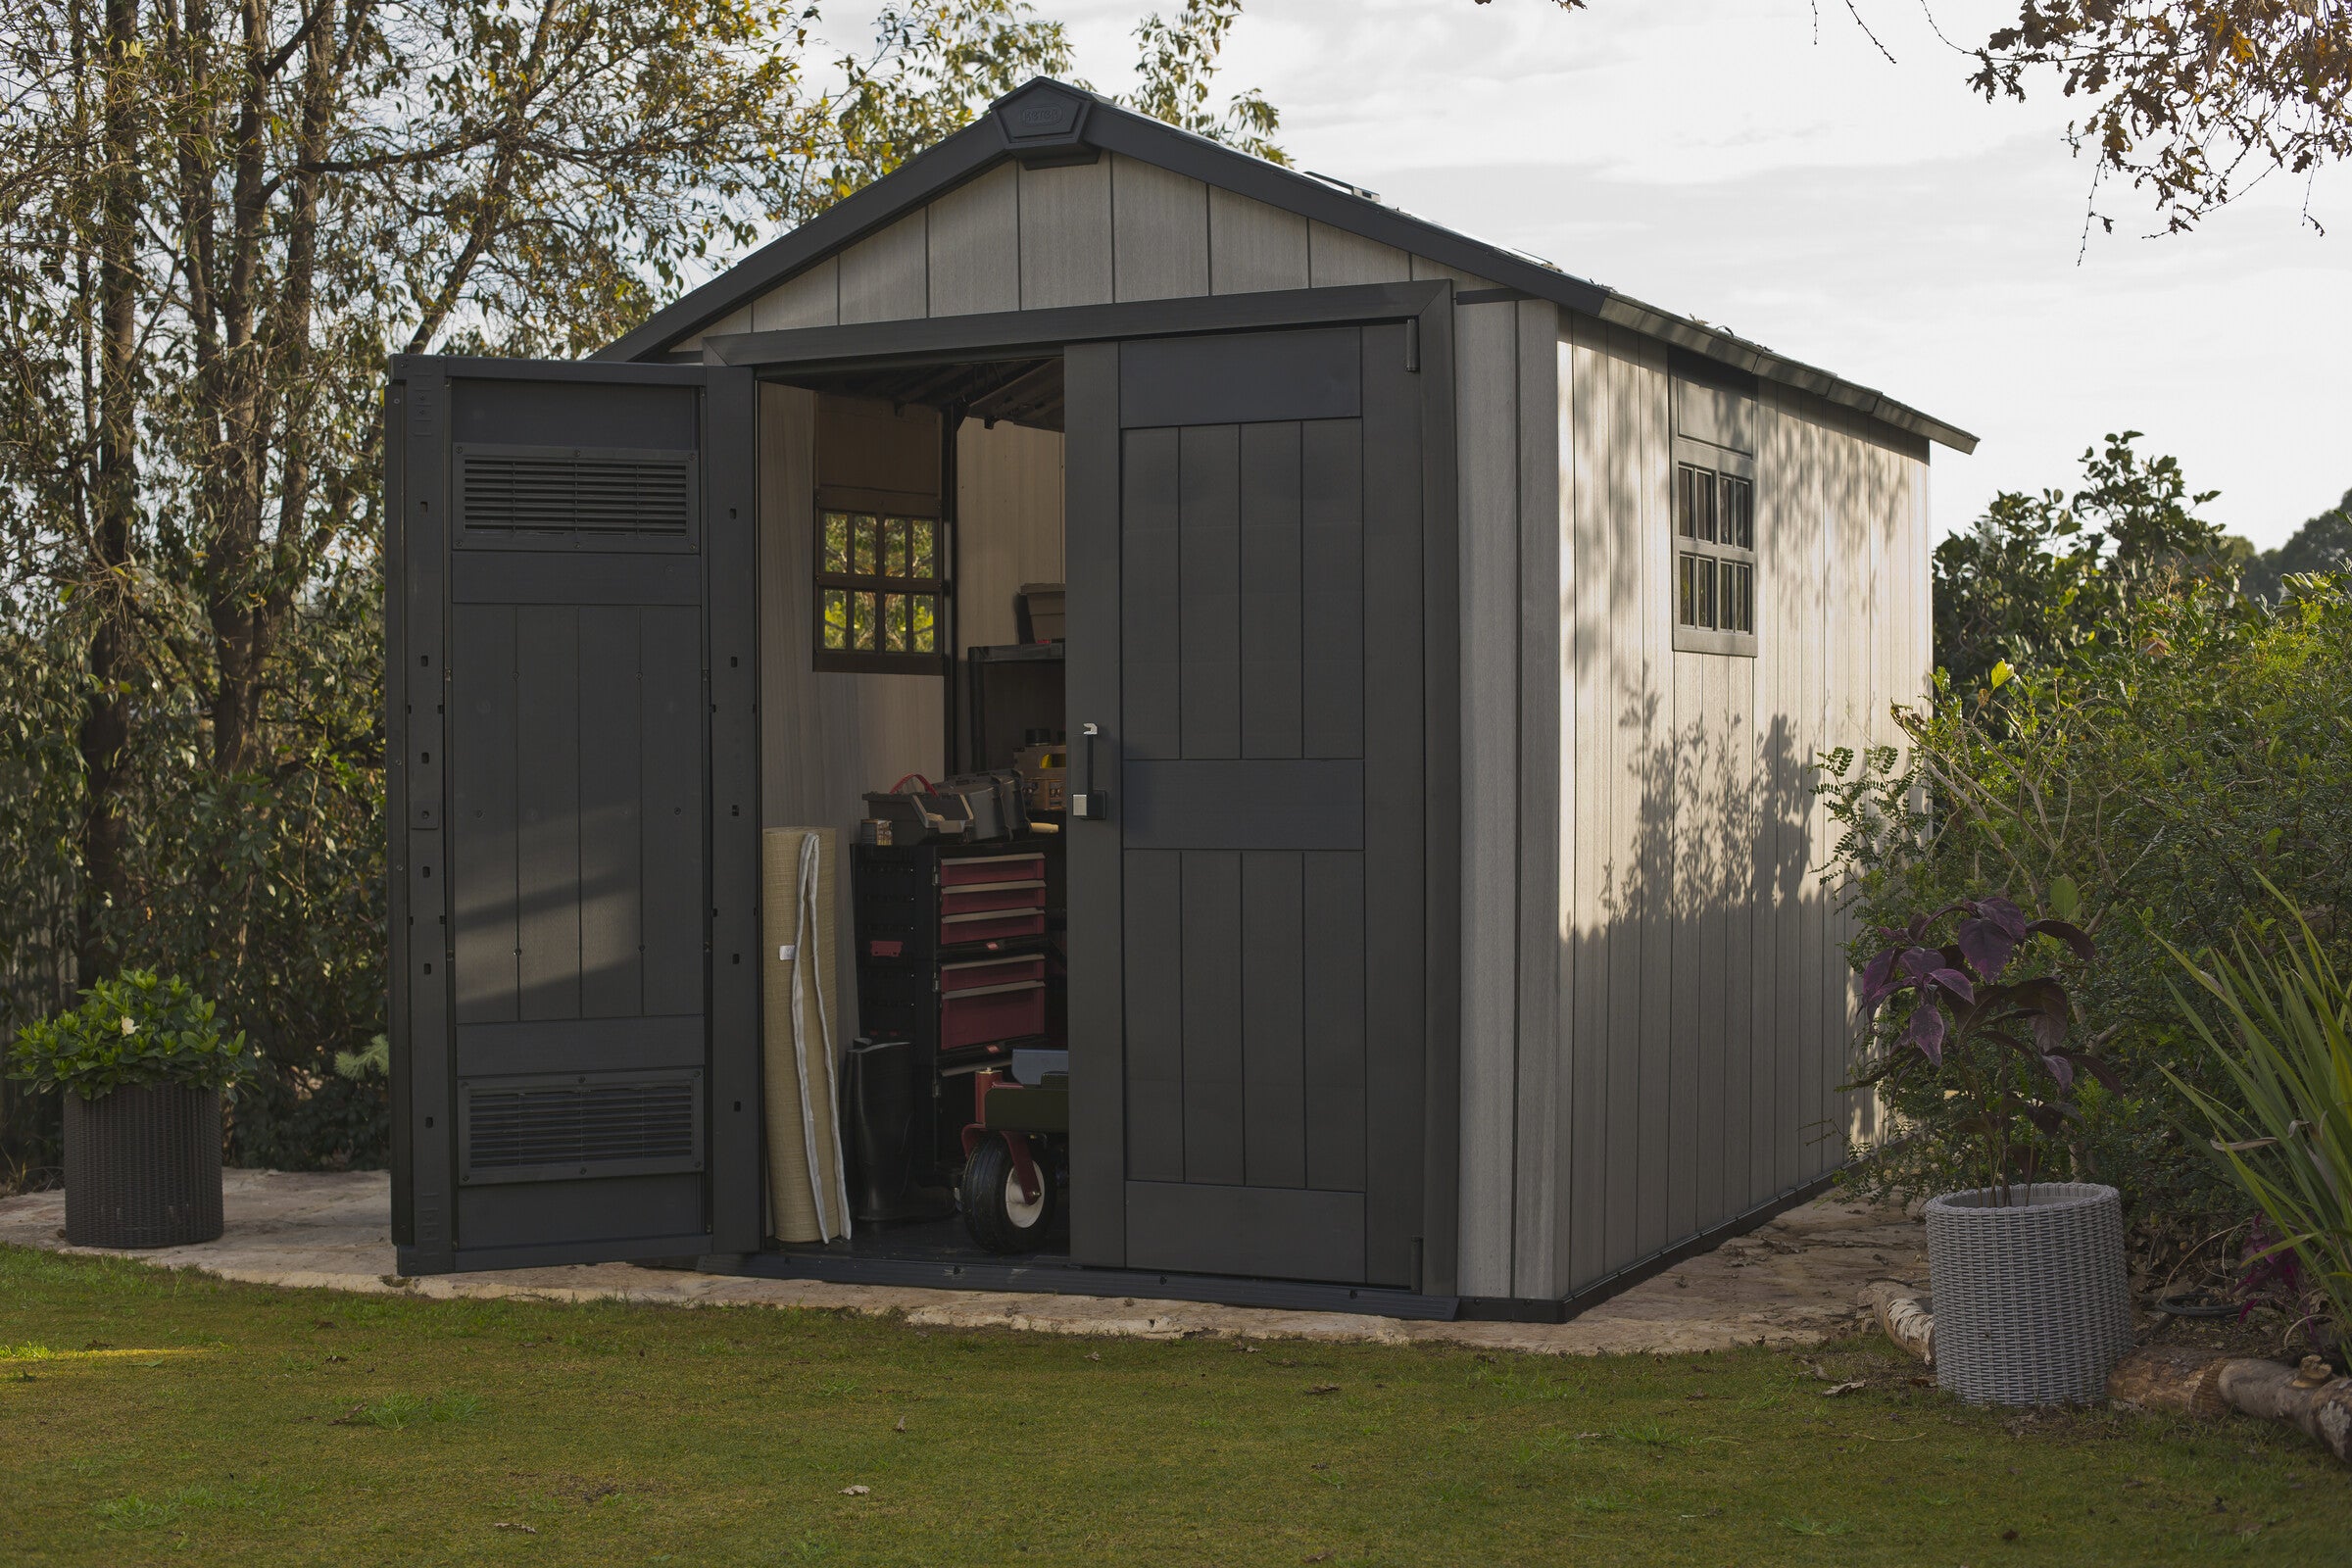 Keter Oakland 7511 Garden shed with double doors